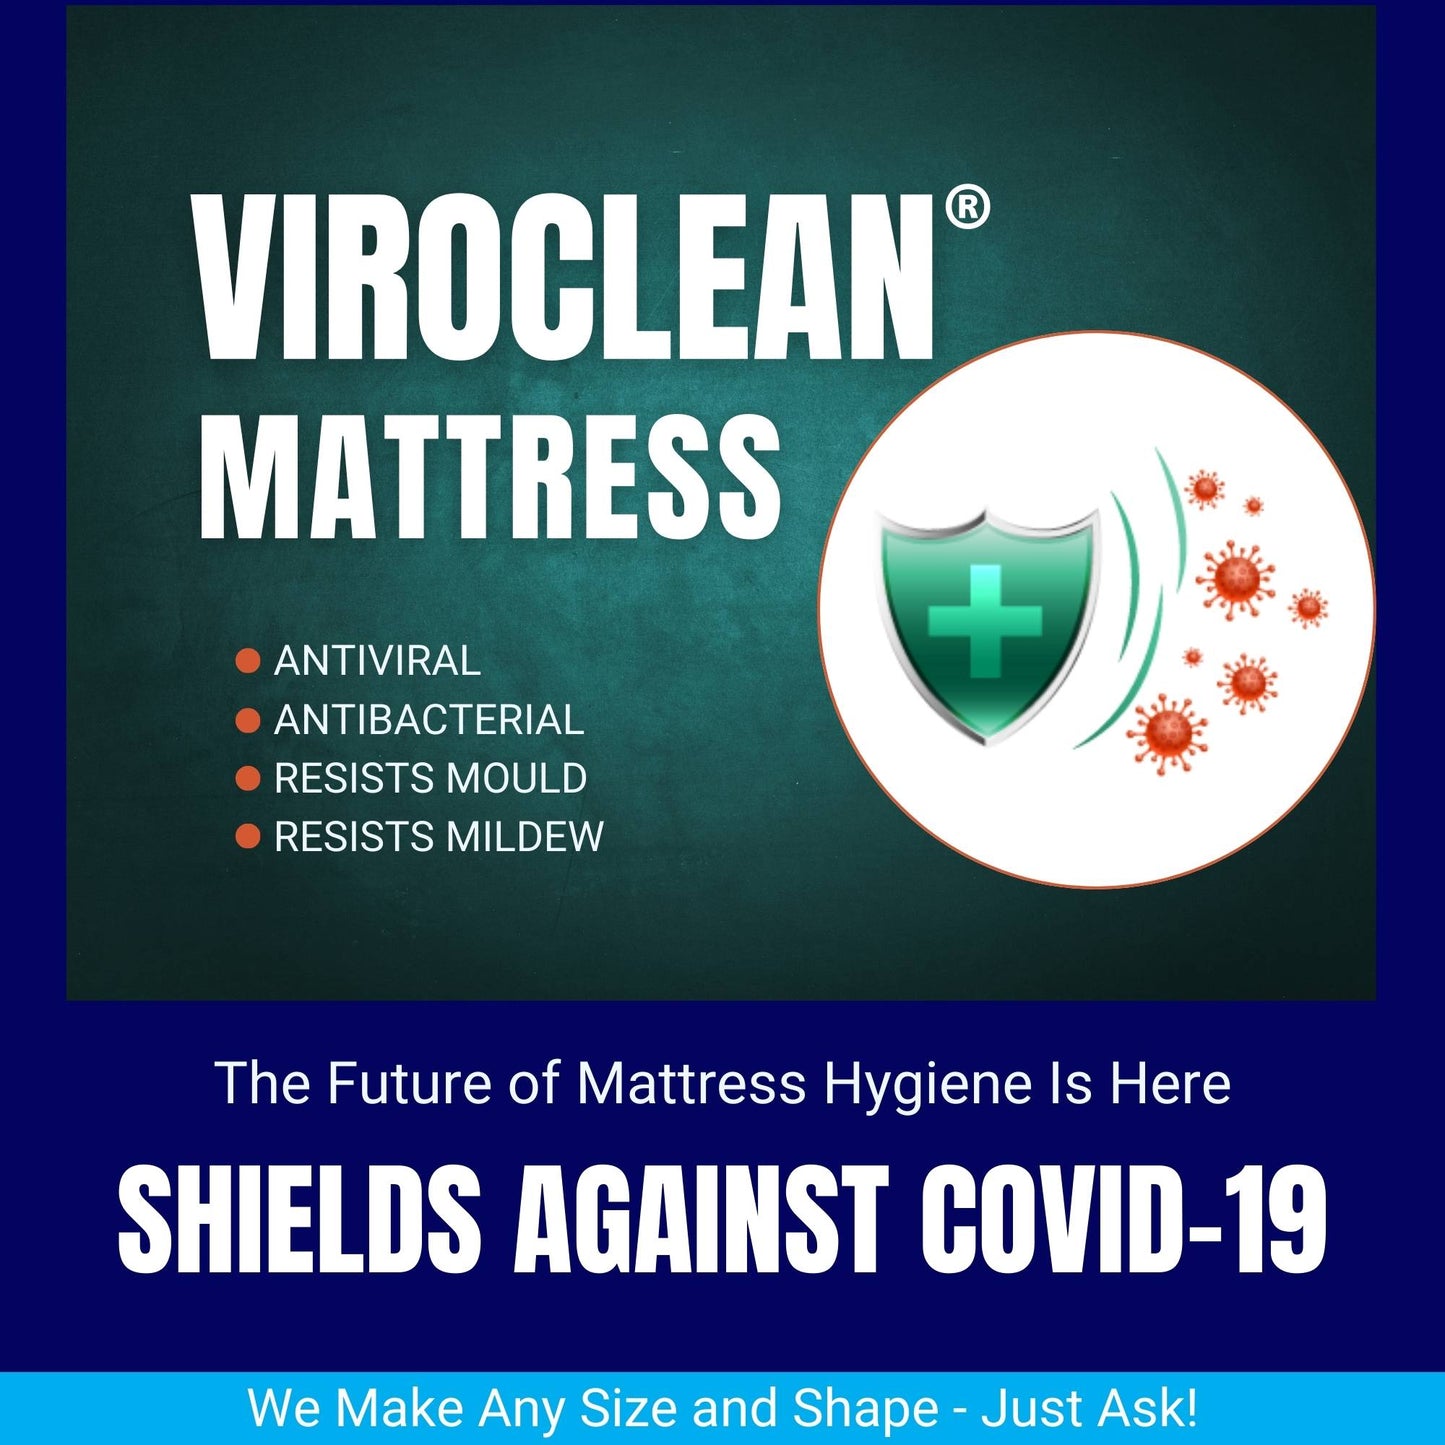 ViroClean Anti-Allergy Mattress Benefits: Hypoallergenic, Breathable, Supportive